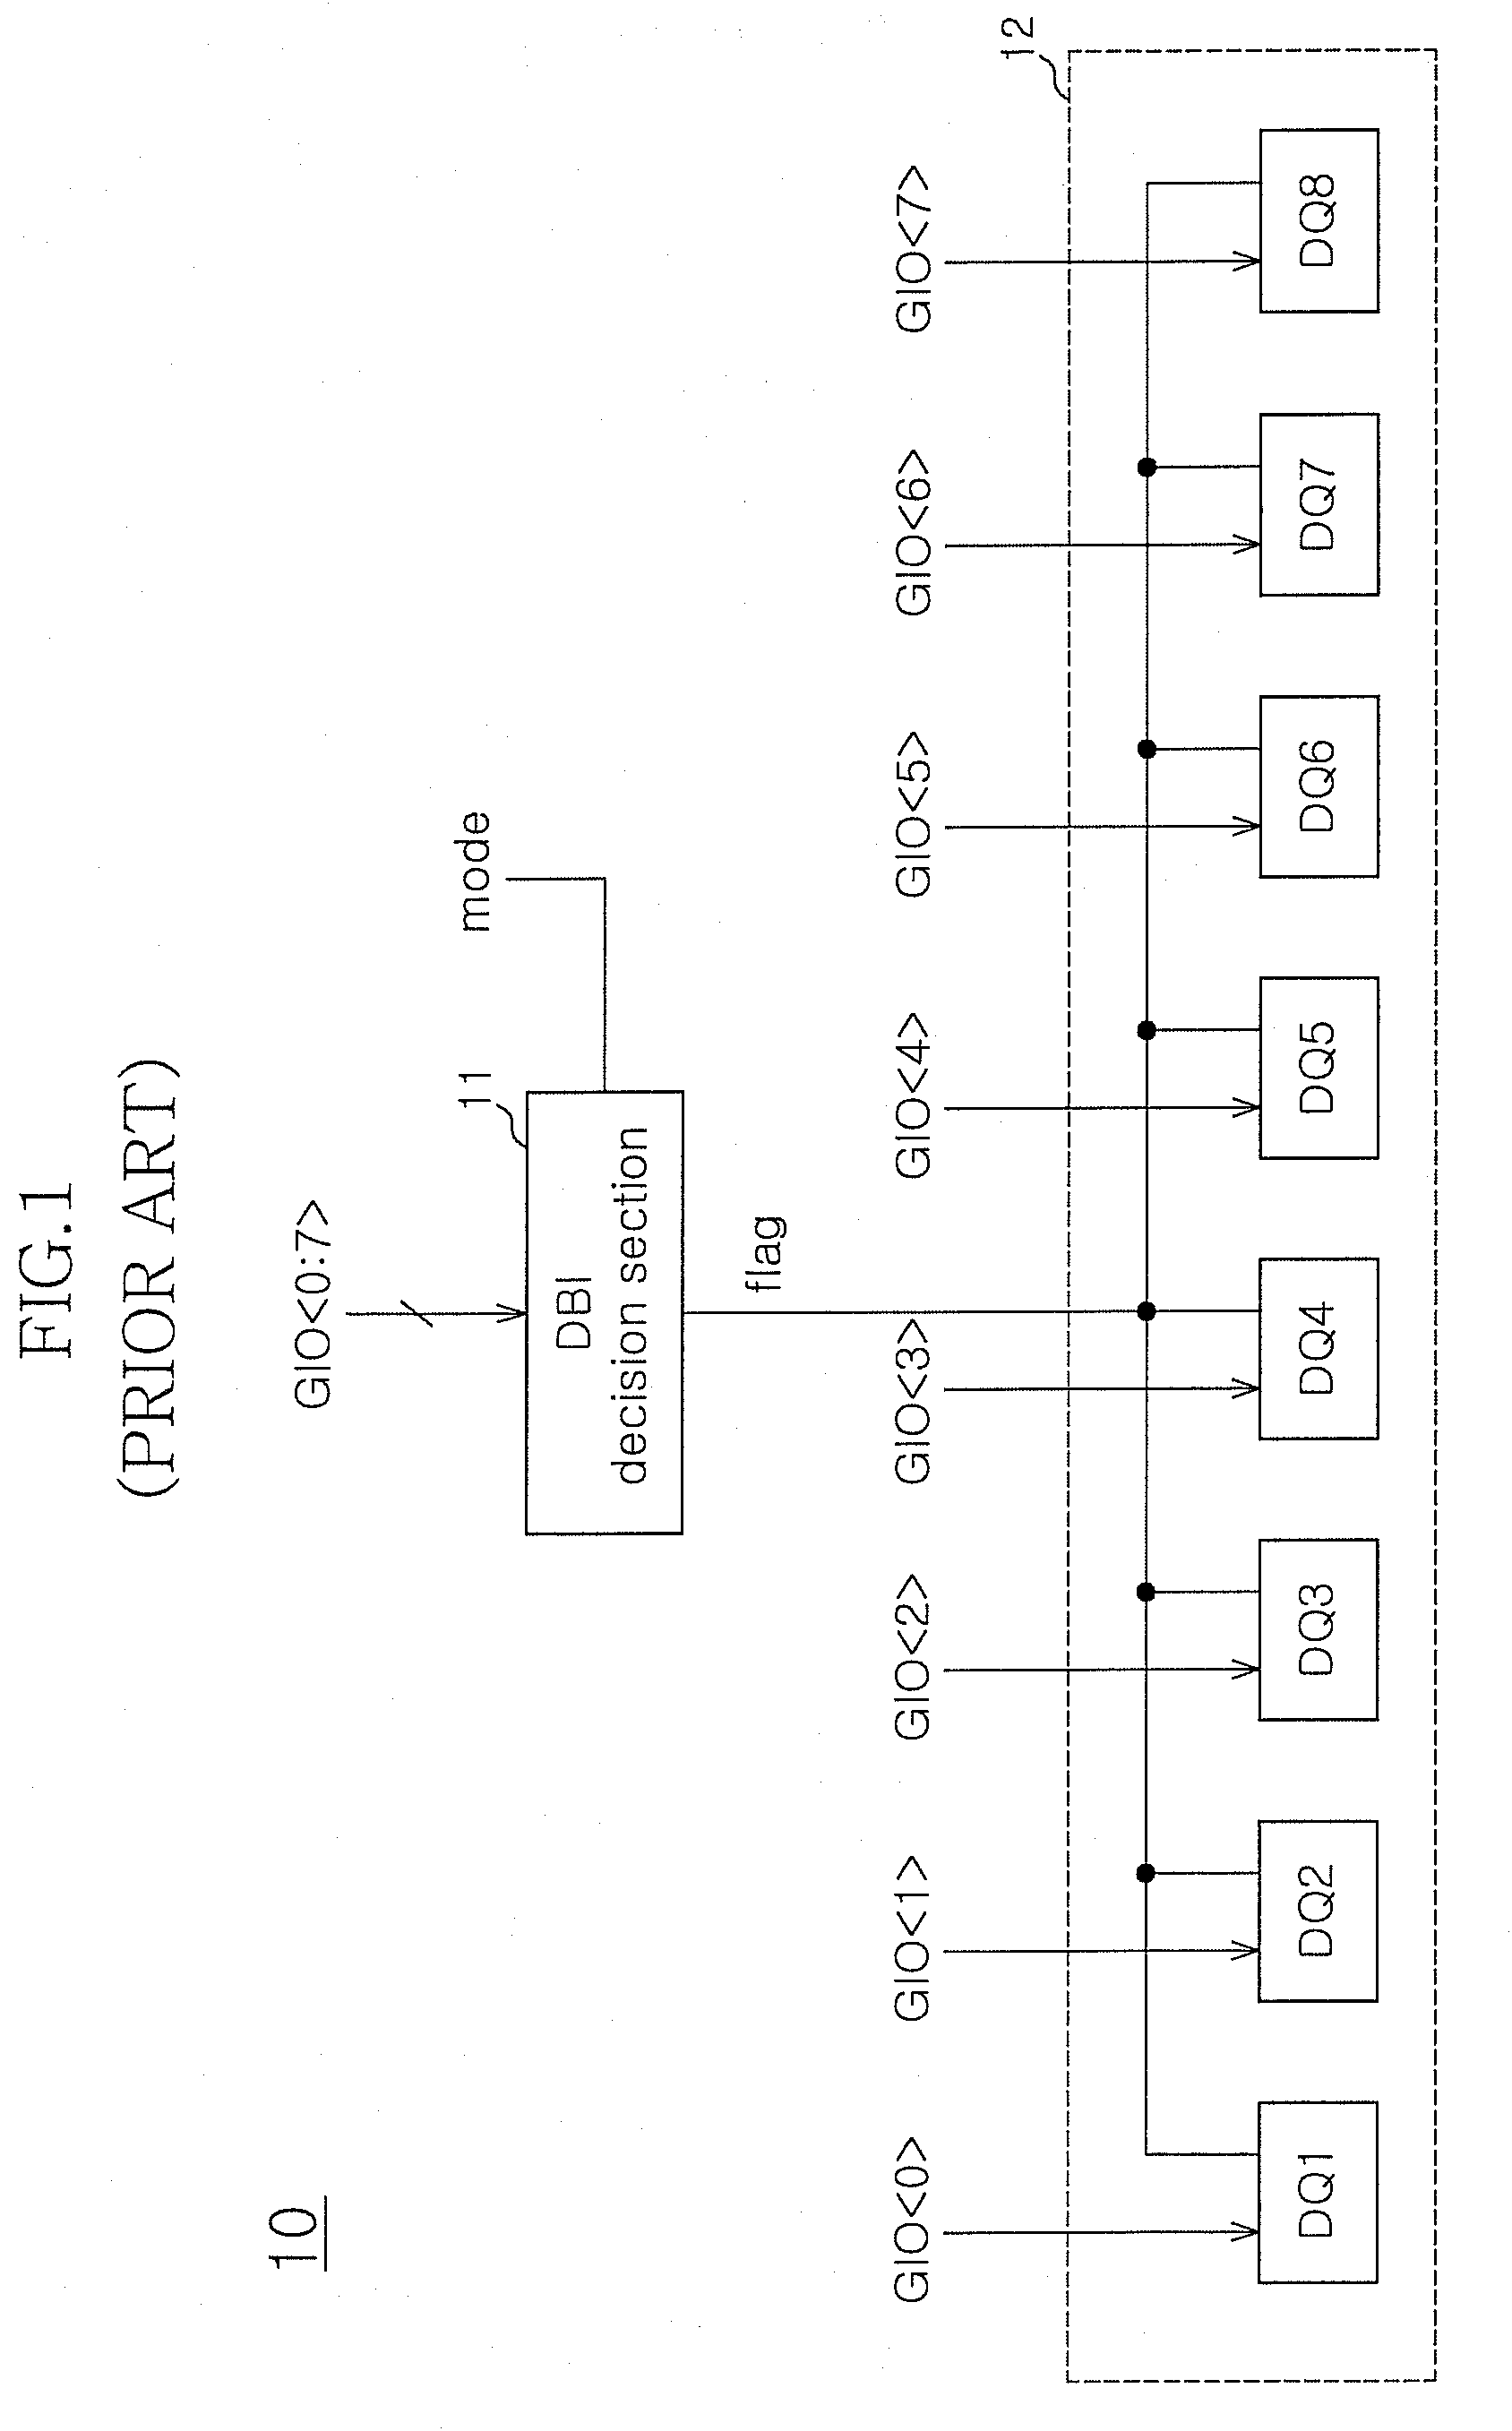 Semiconductor memory apparatus and a method for reading data stored therein